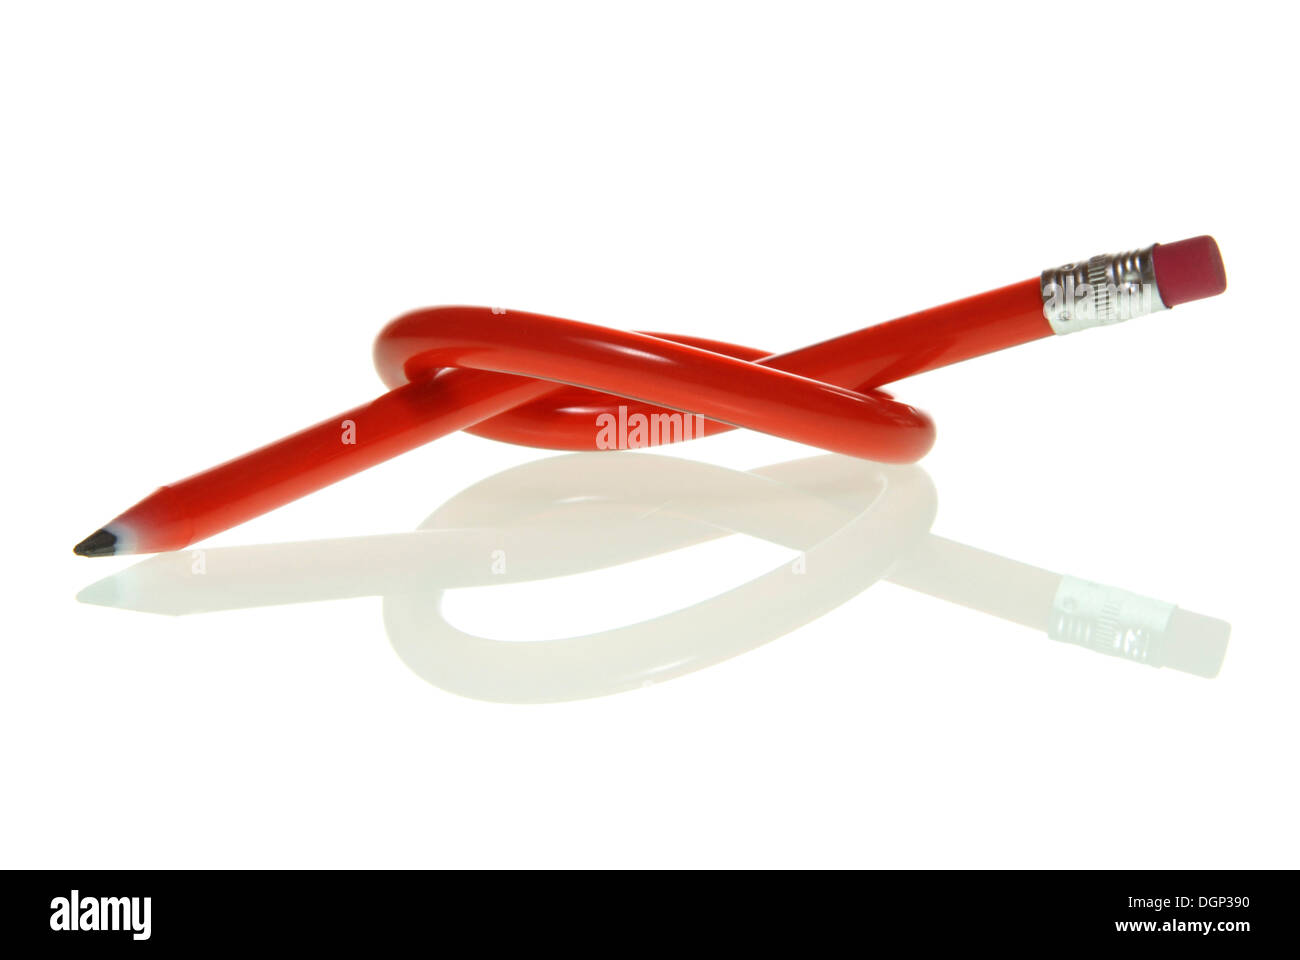 Pen with knot Stock Photo